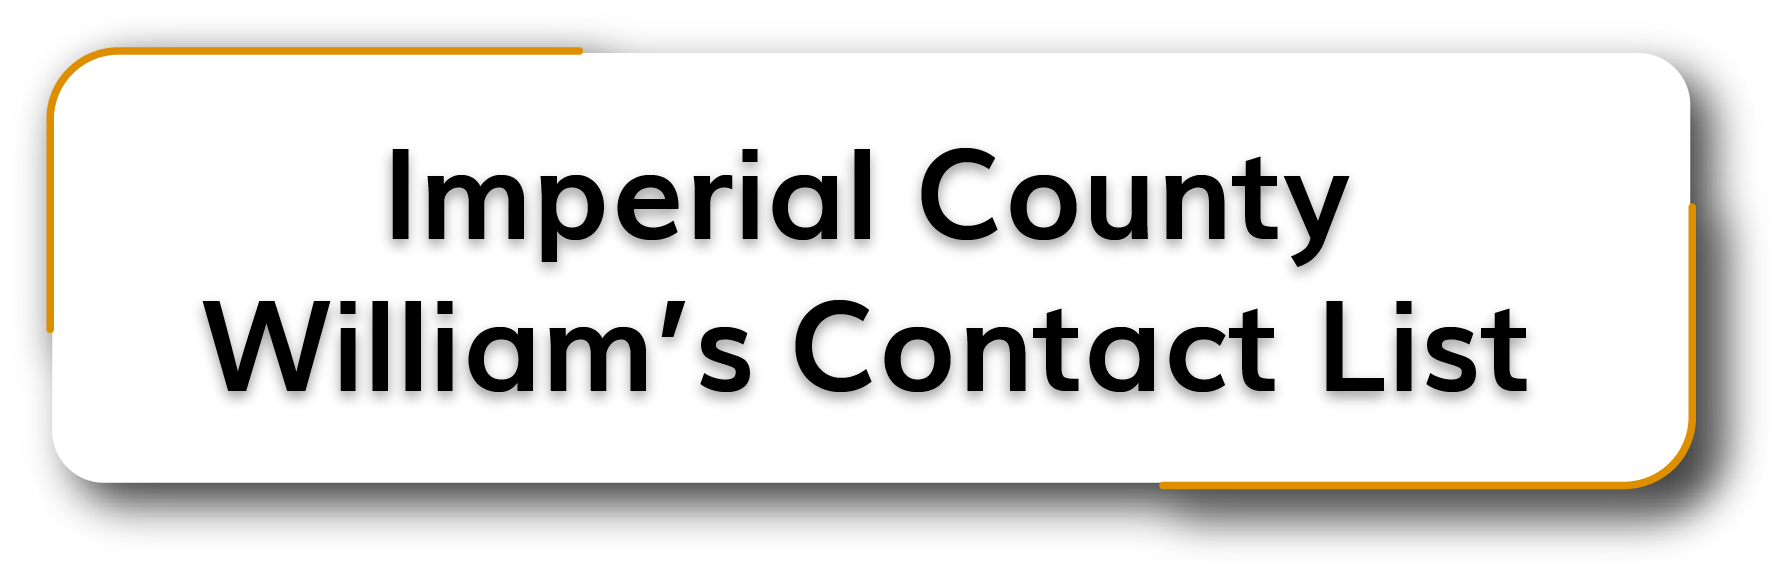 Imperial County William's Contact List Button